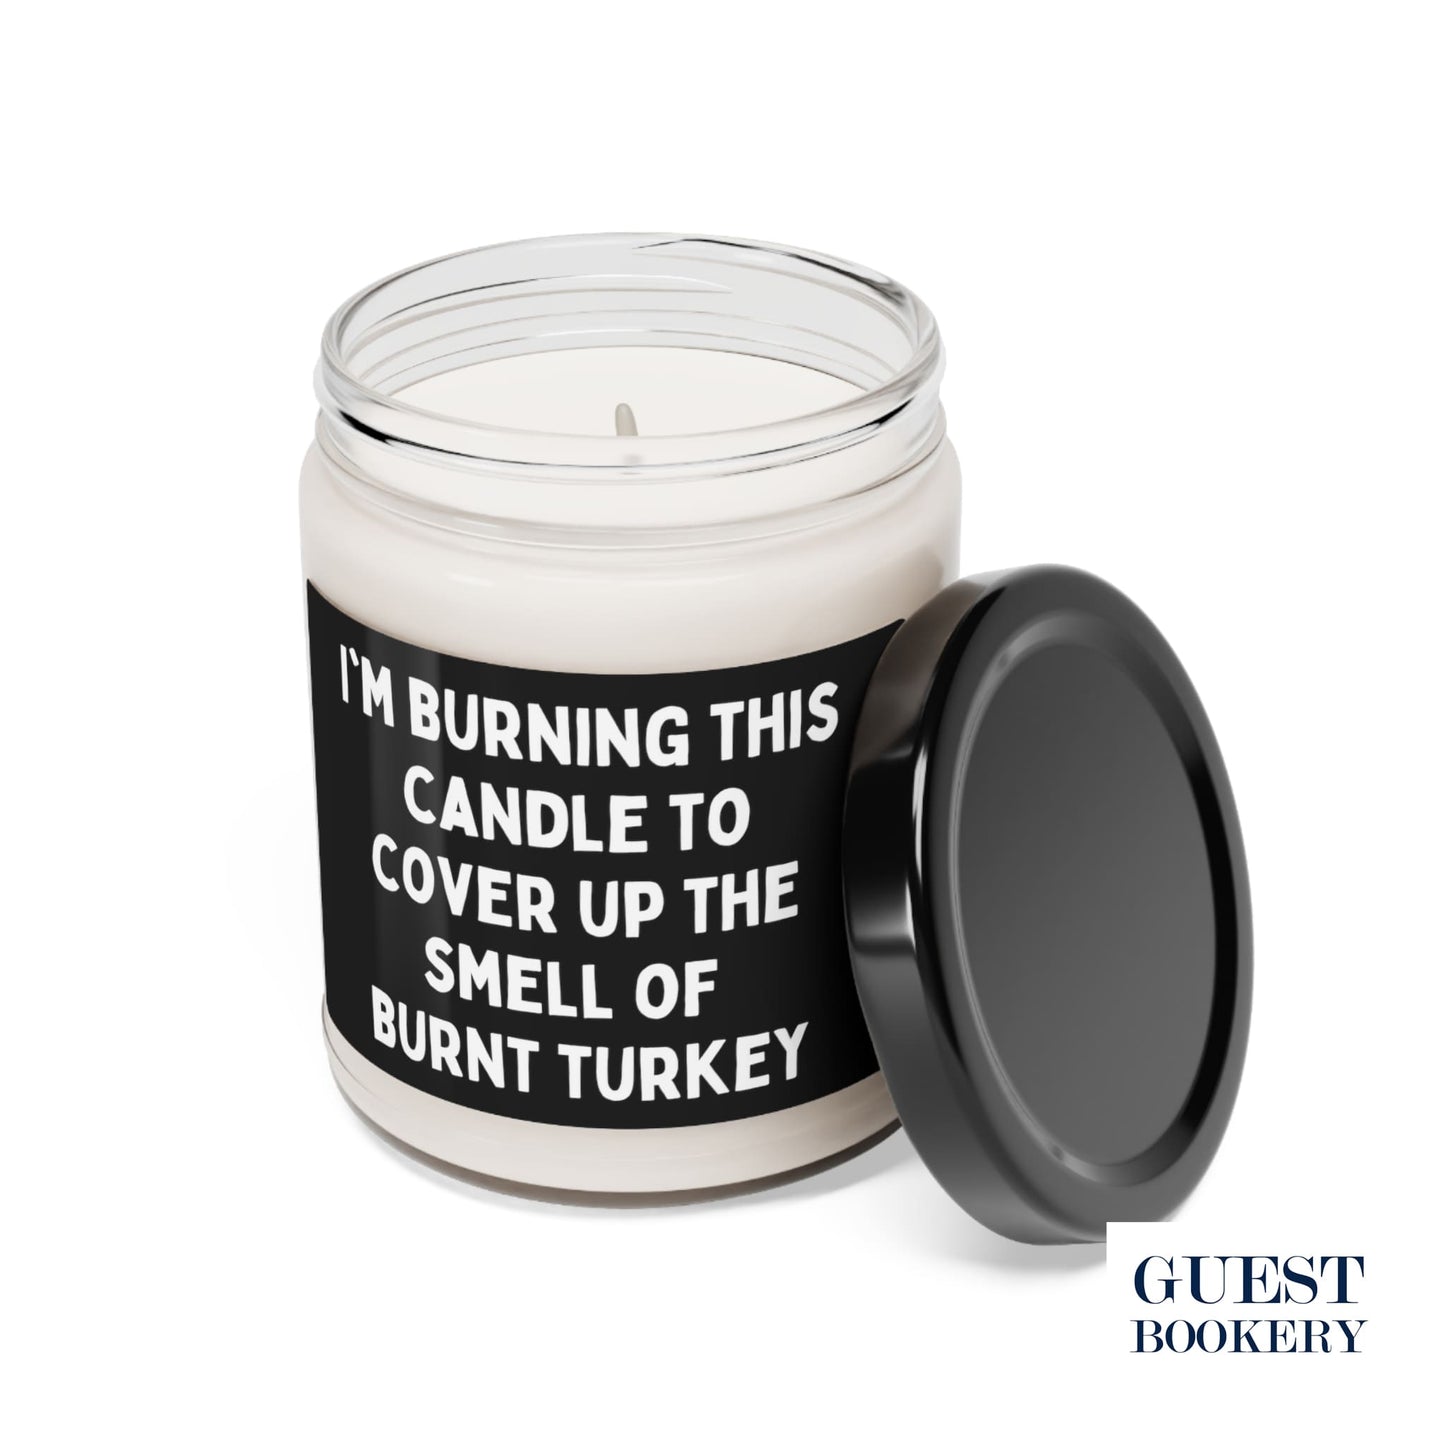 I'm Burning This Candle to Cover Up the Smell of Burnt Turkey Candle